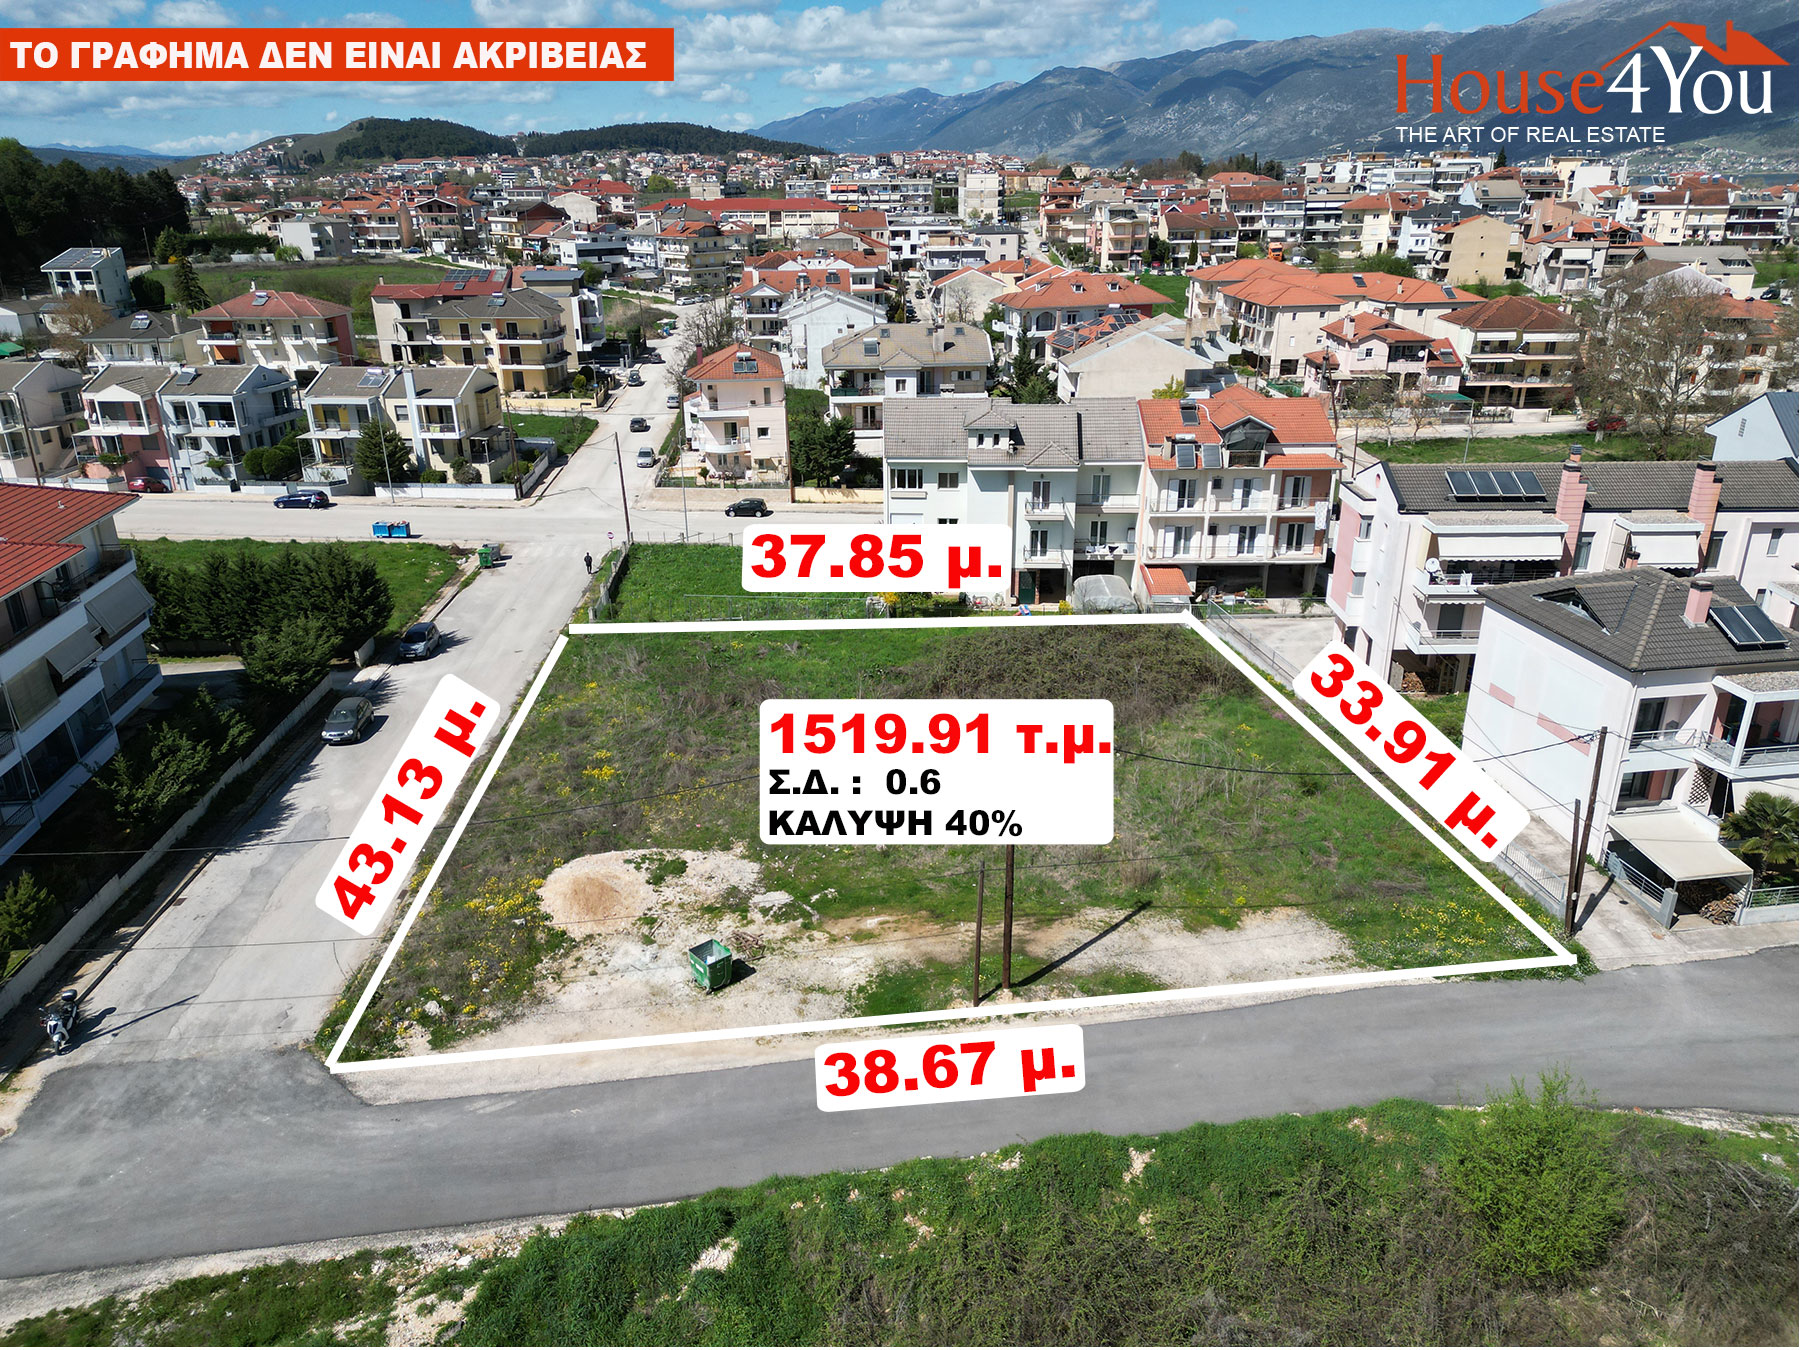 Corner plot of 1,521 sq.m. for sale. with S.D. 0.6 in Vrysoula of Ioannina